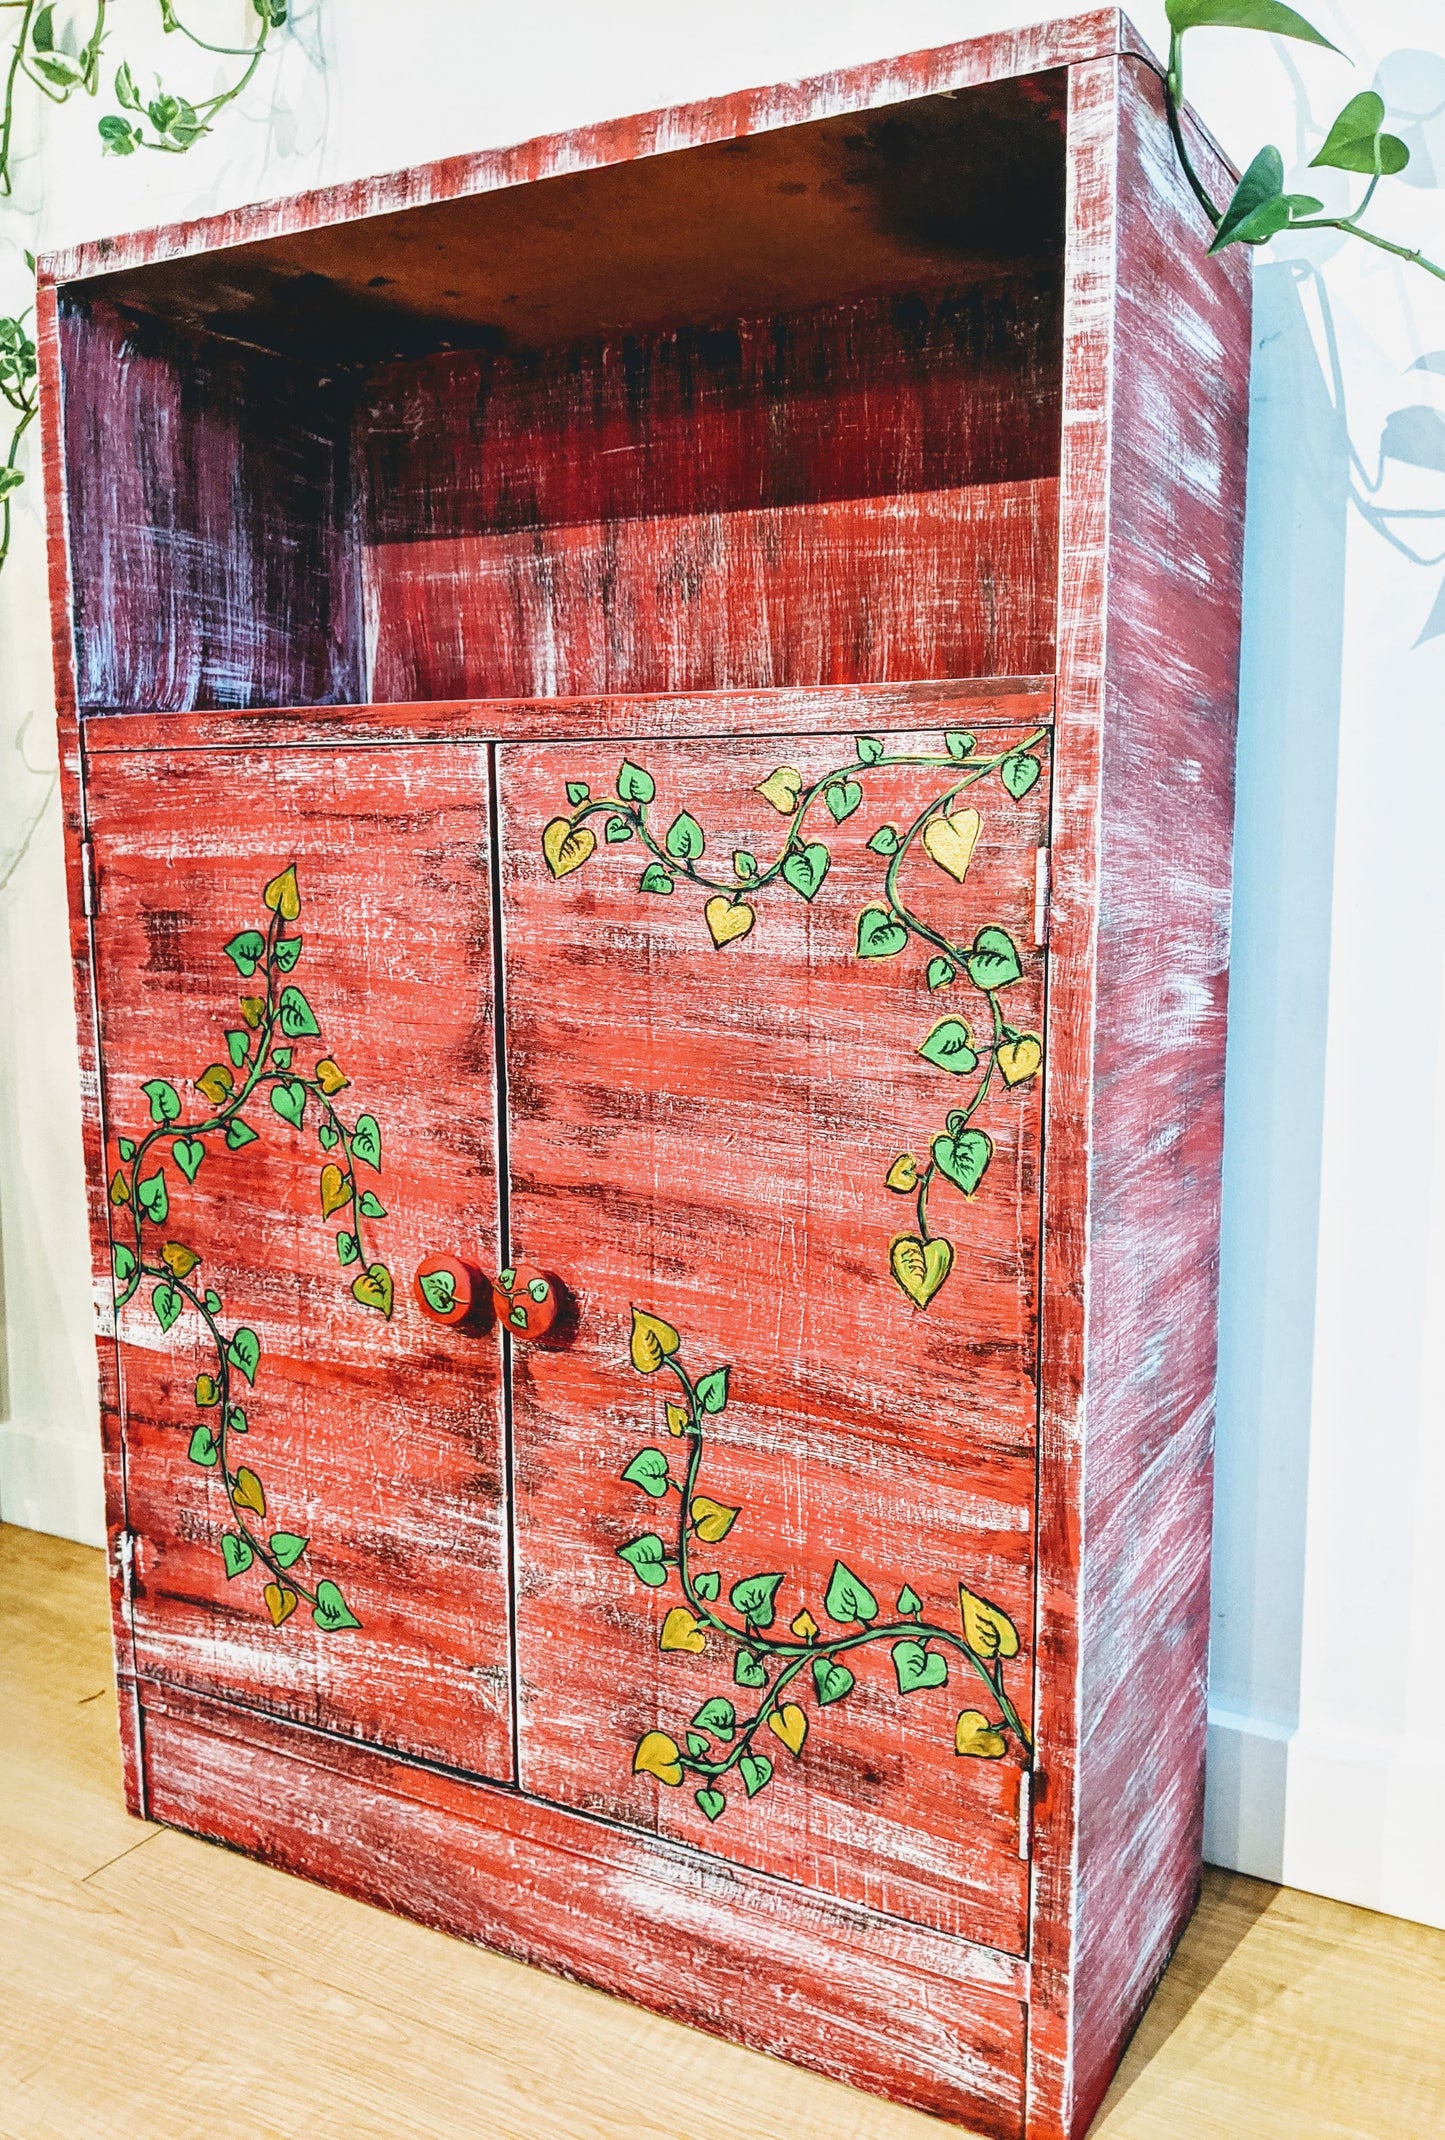 The Red Apple Cabinet